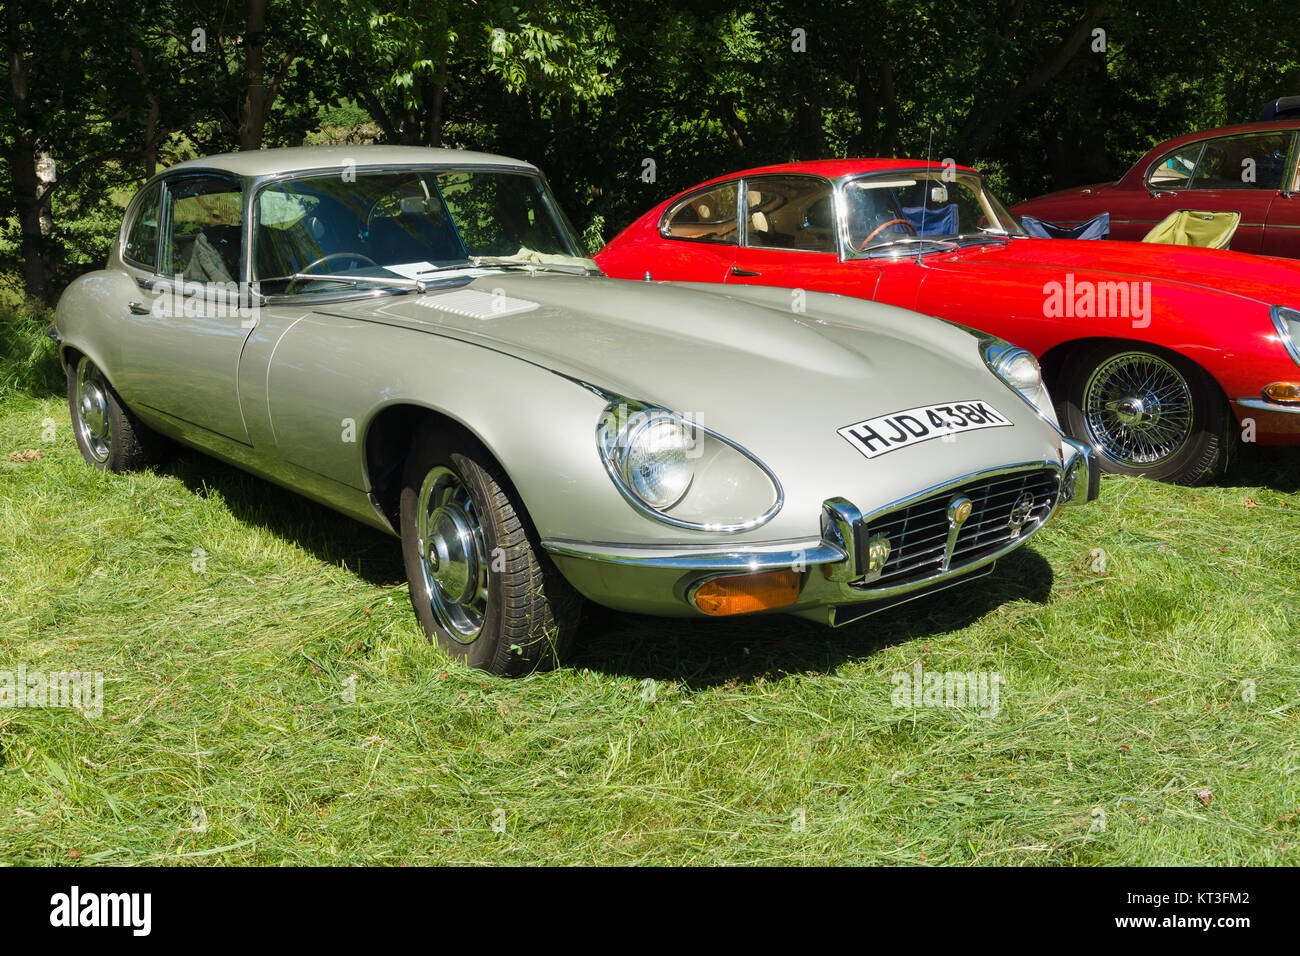 Jaguar E type an iconic classic British sports car built from 1961 and 1975 at a vintage vehicle rally Stock Photo